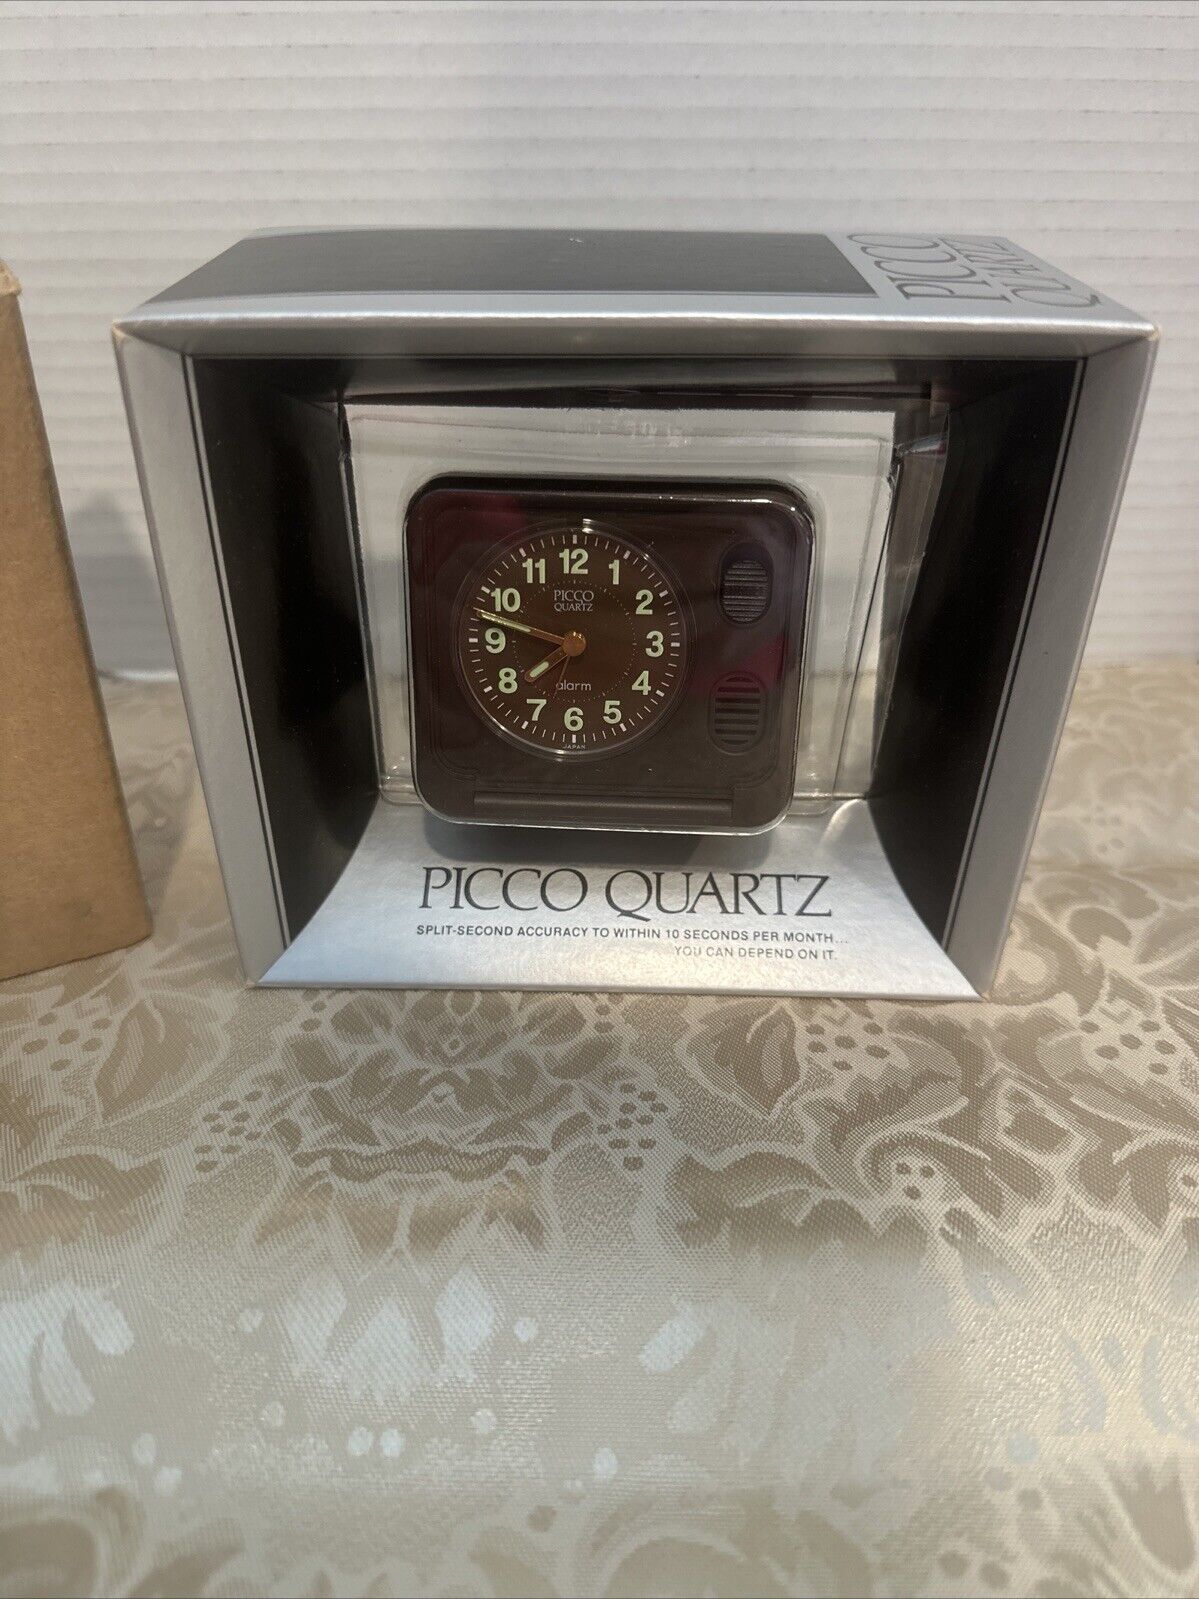 Rare Still In Packaging Picco Quartz Travel Clock Hard To Find New In Box Sleeve